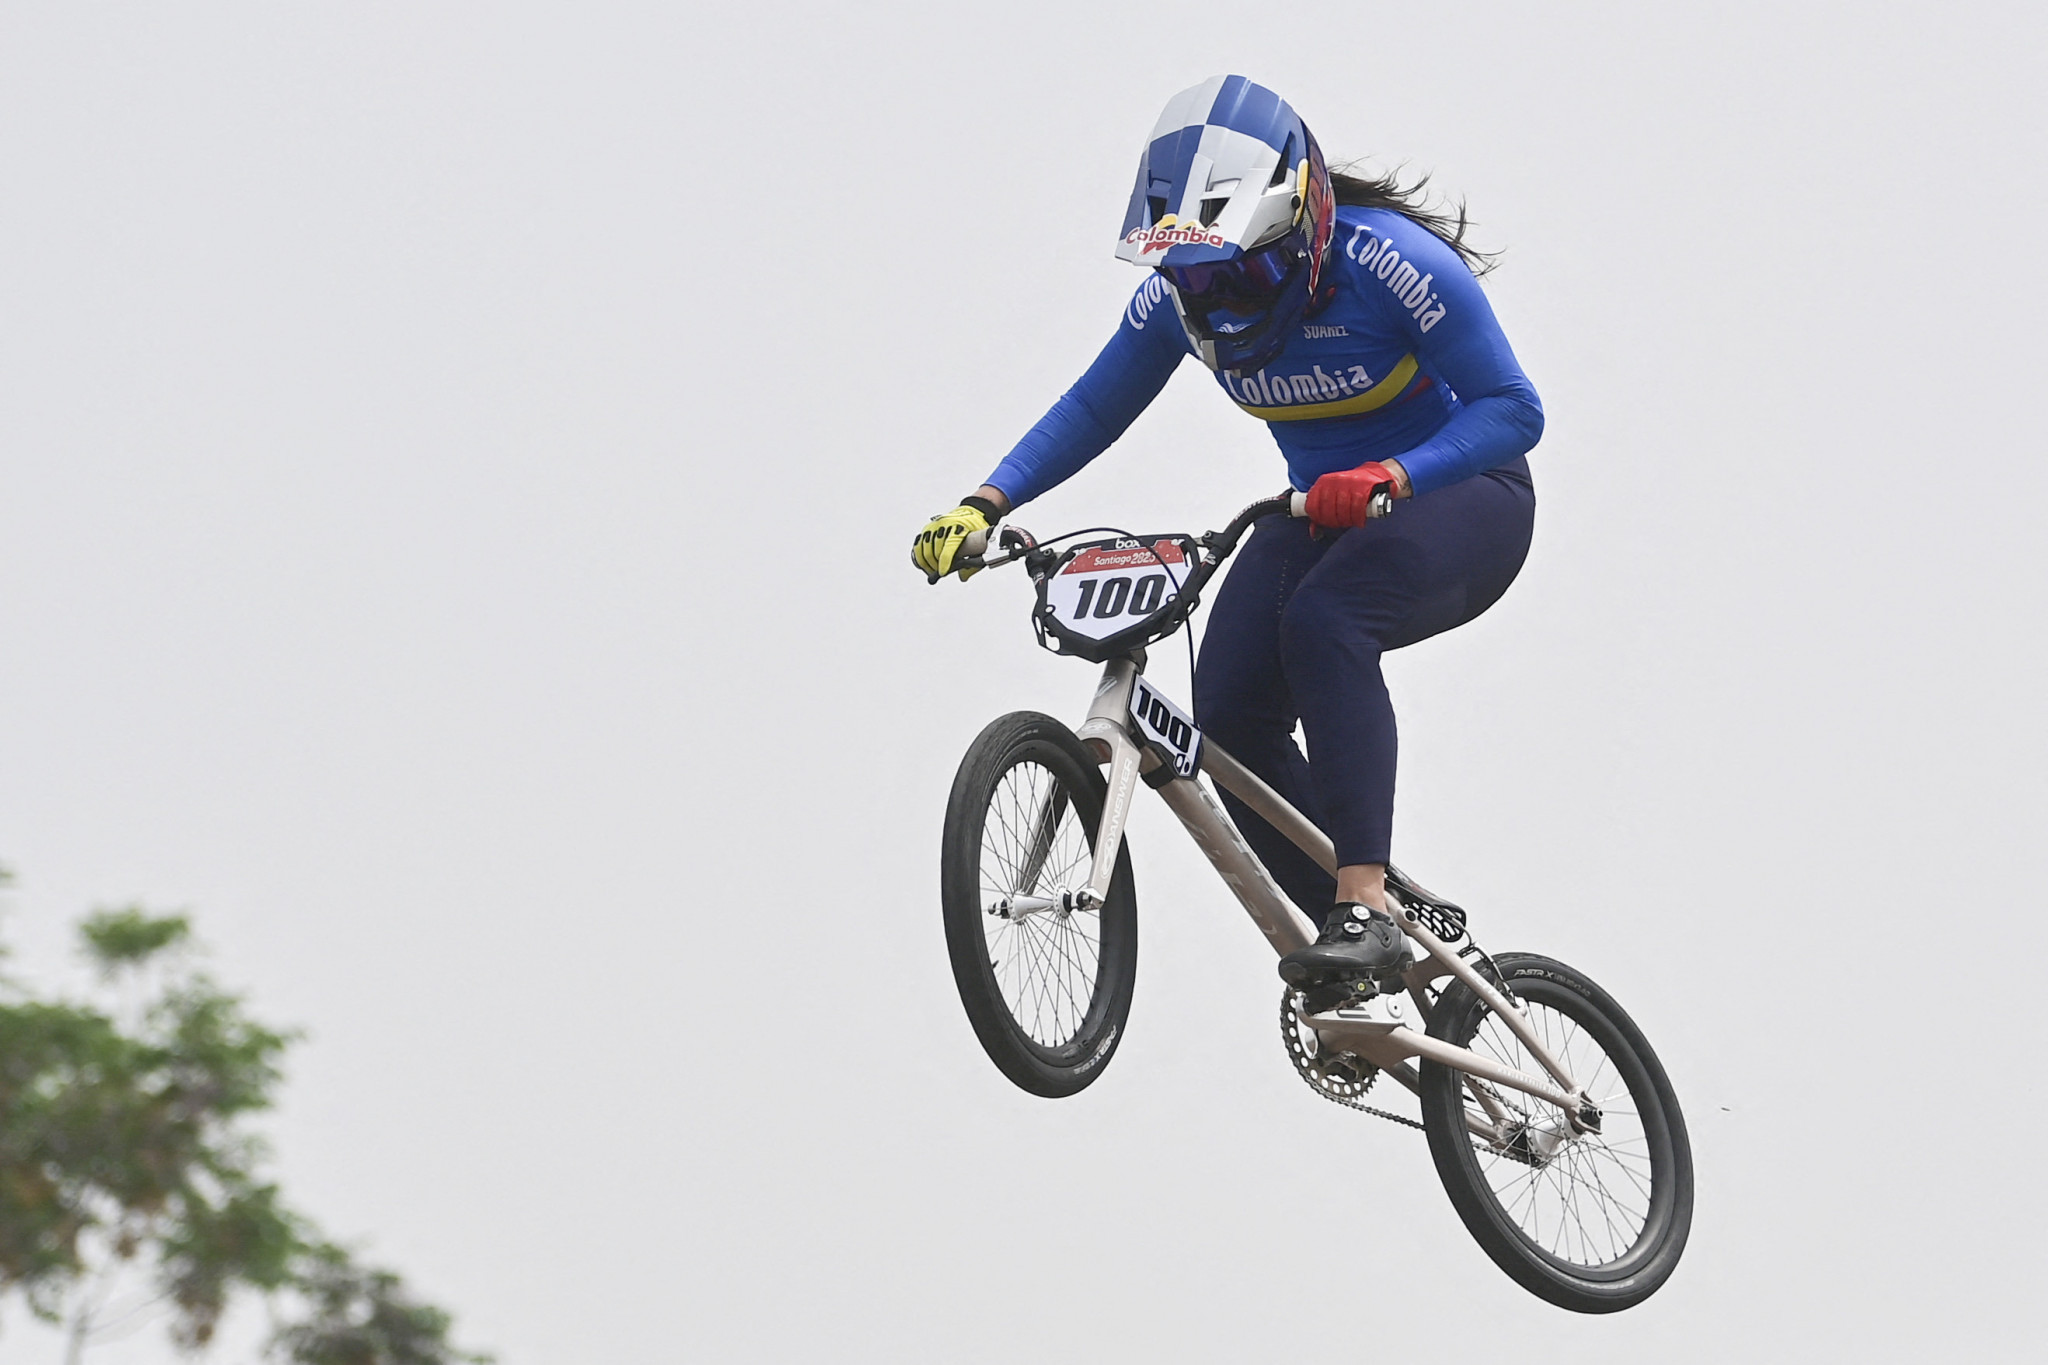 Mariana Pajón takes flight en-route to the women's BMX title ©Getty Images